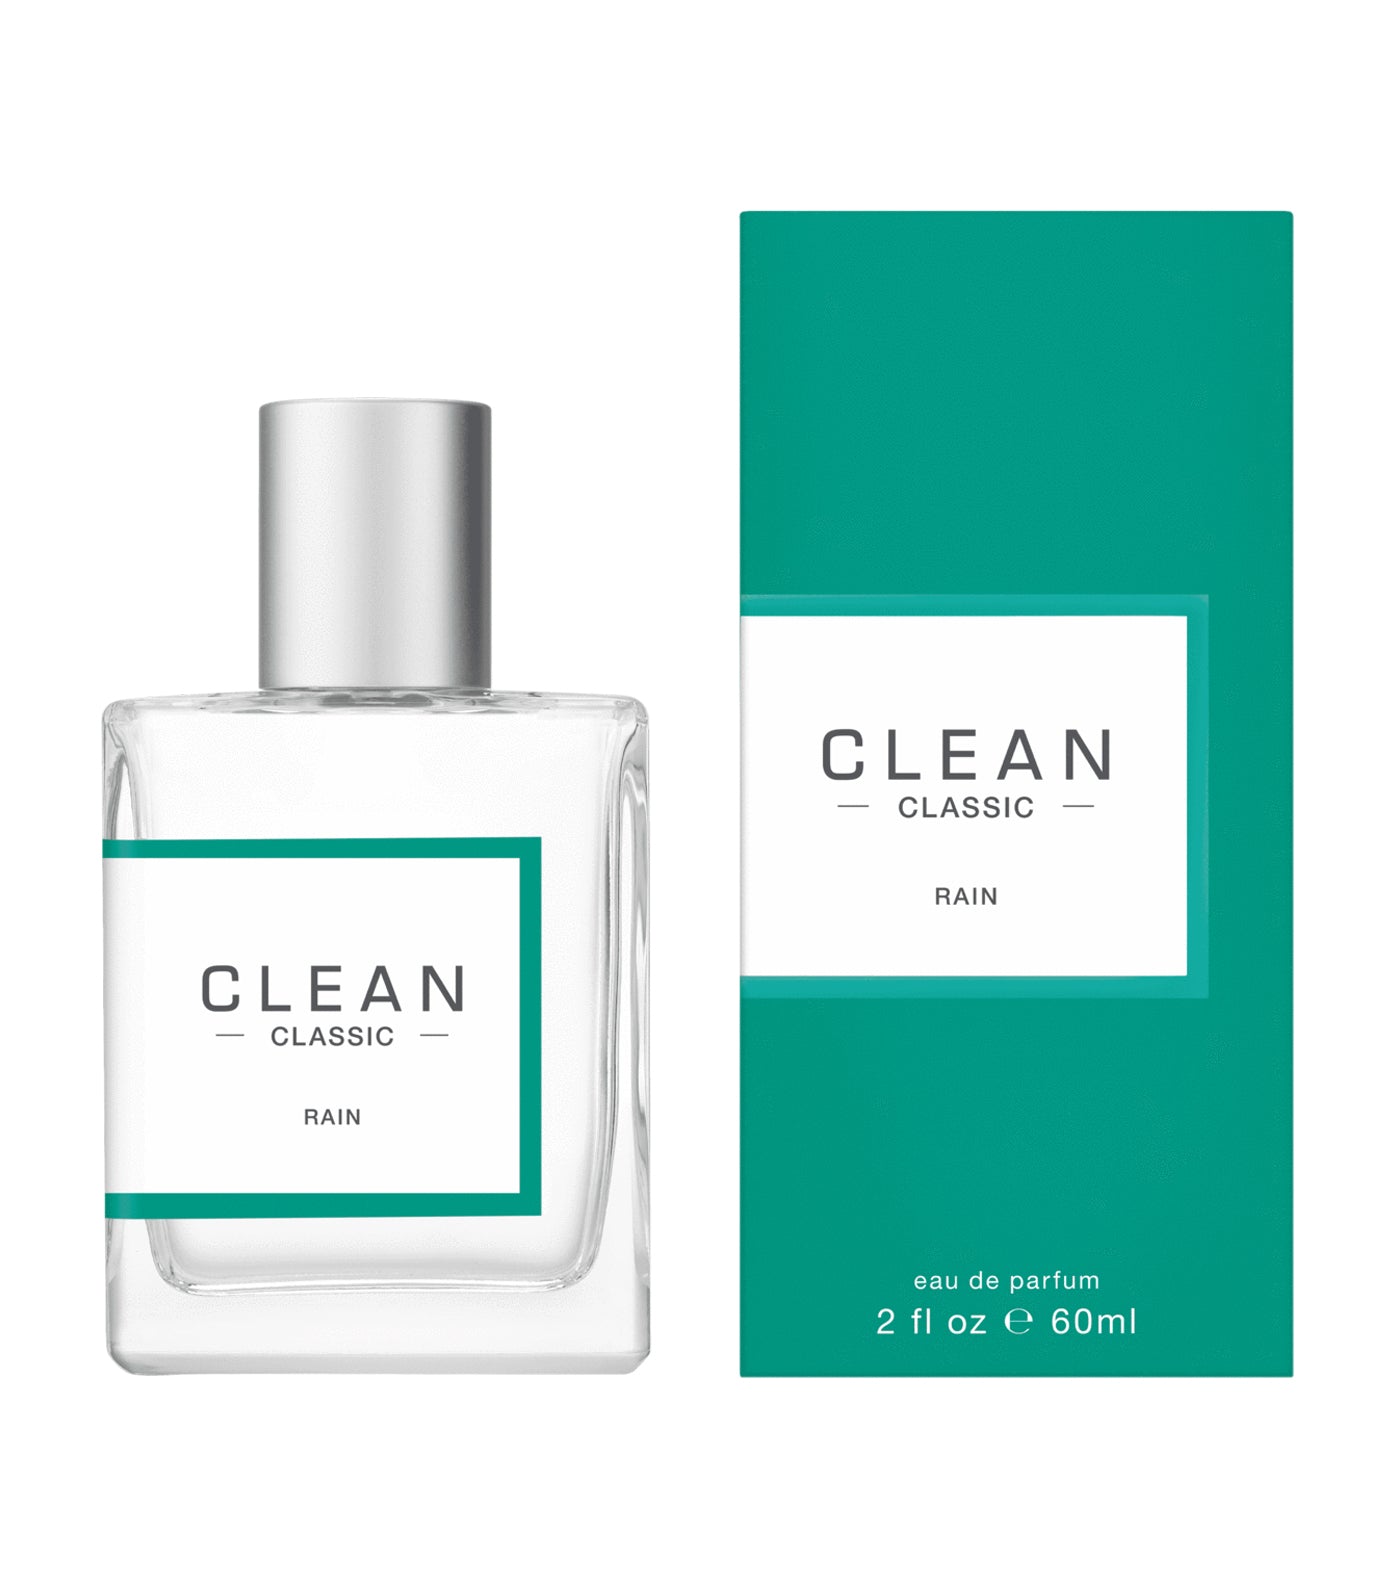 CLEAN CLASSIC Rain by CLEAN Beauty Collective